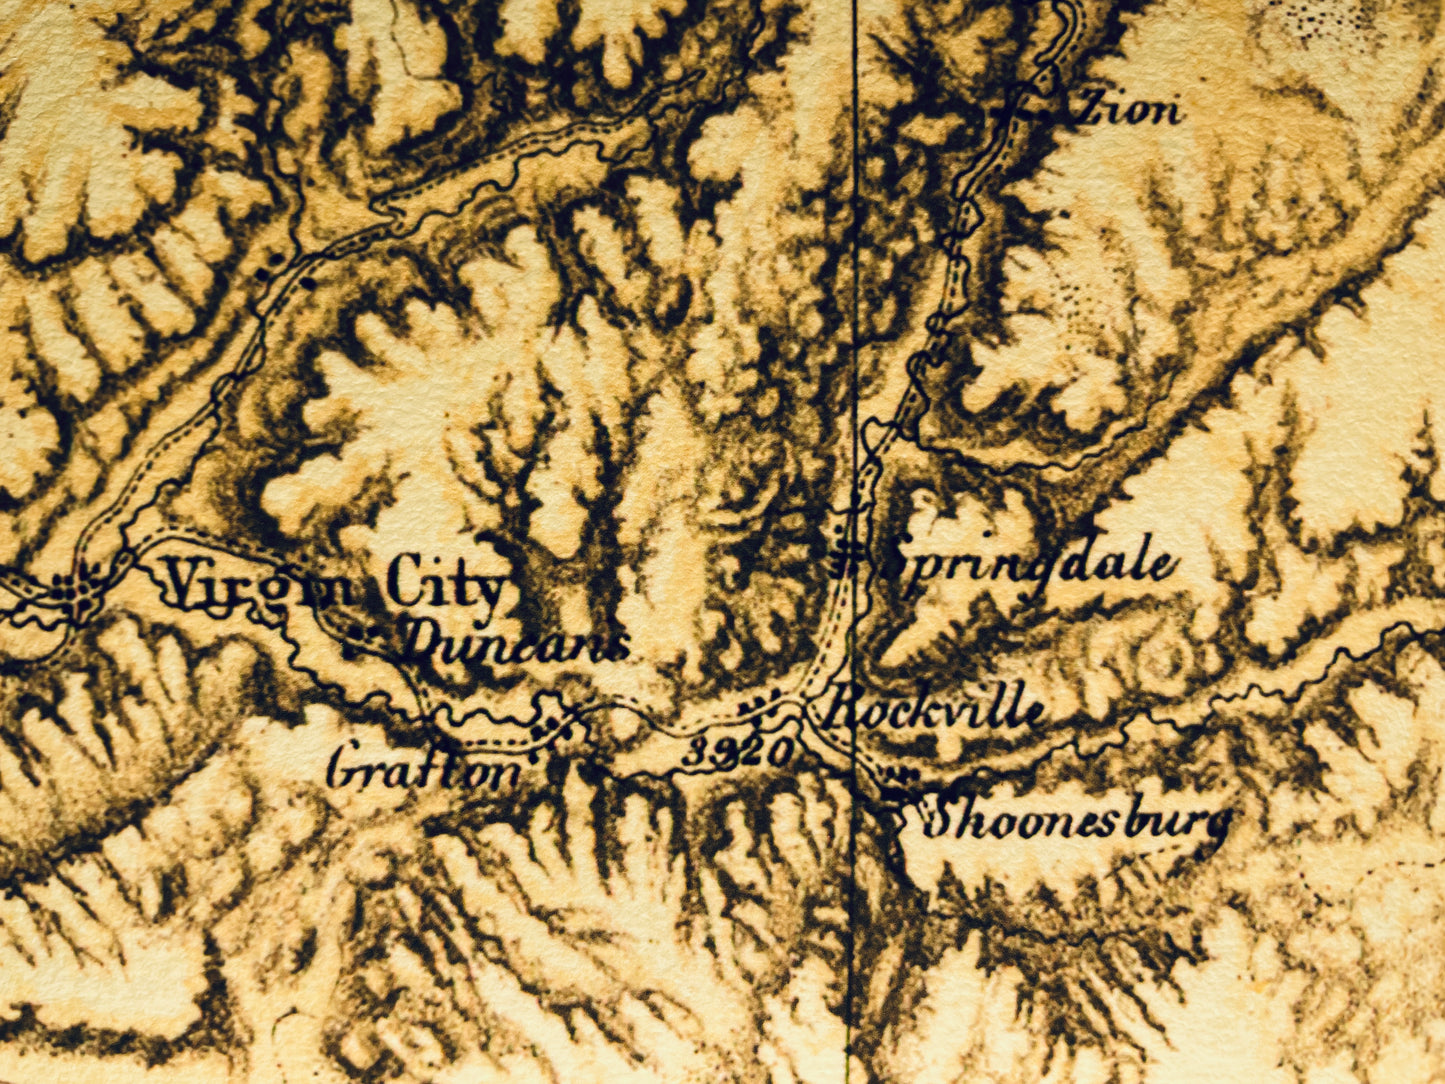 1873 Grand Canyon Map from Wheeler Expeditions